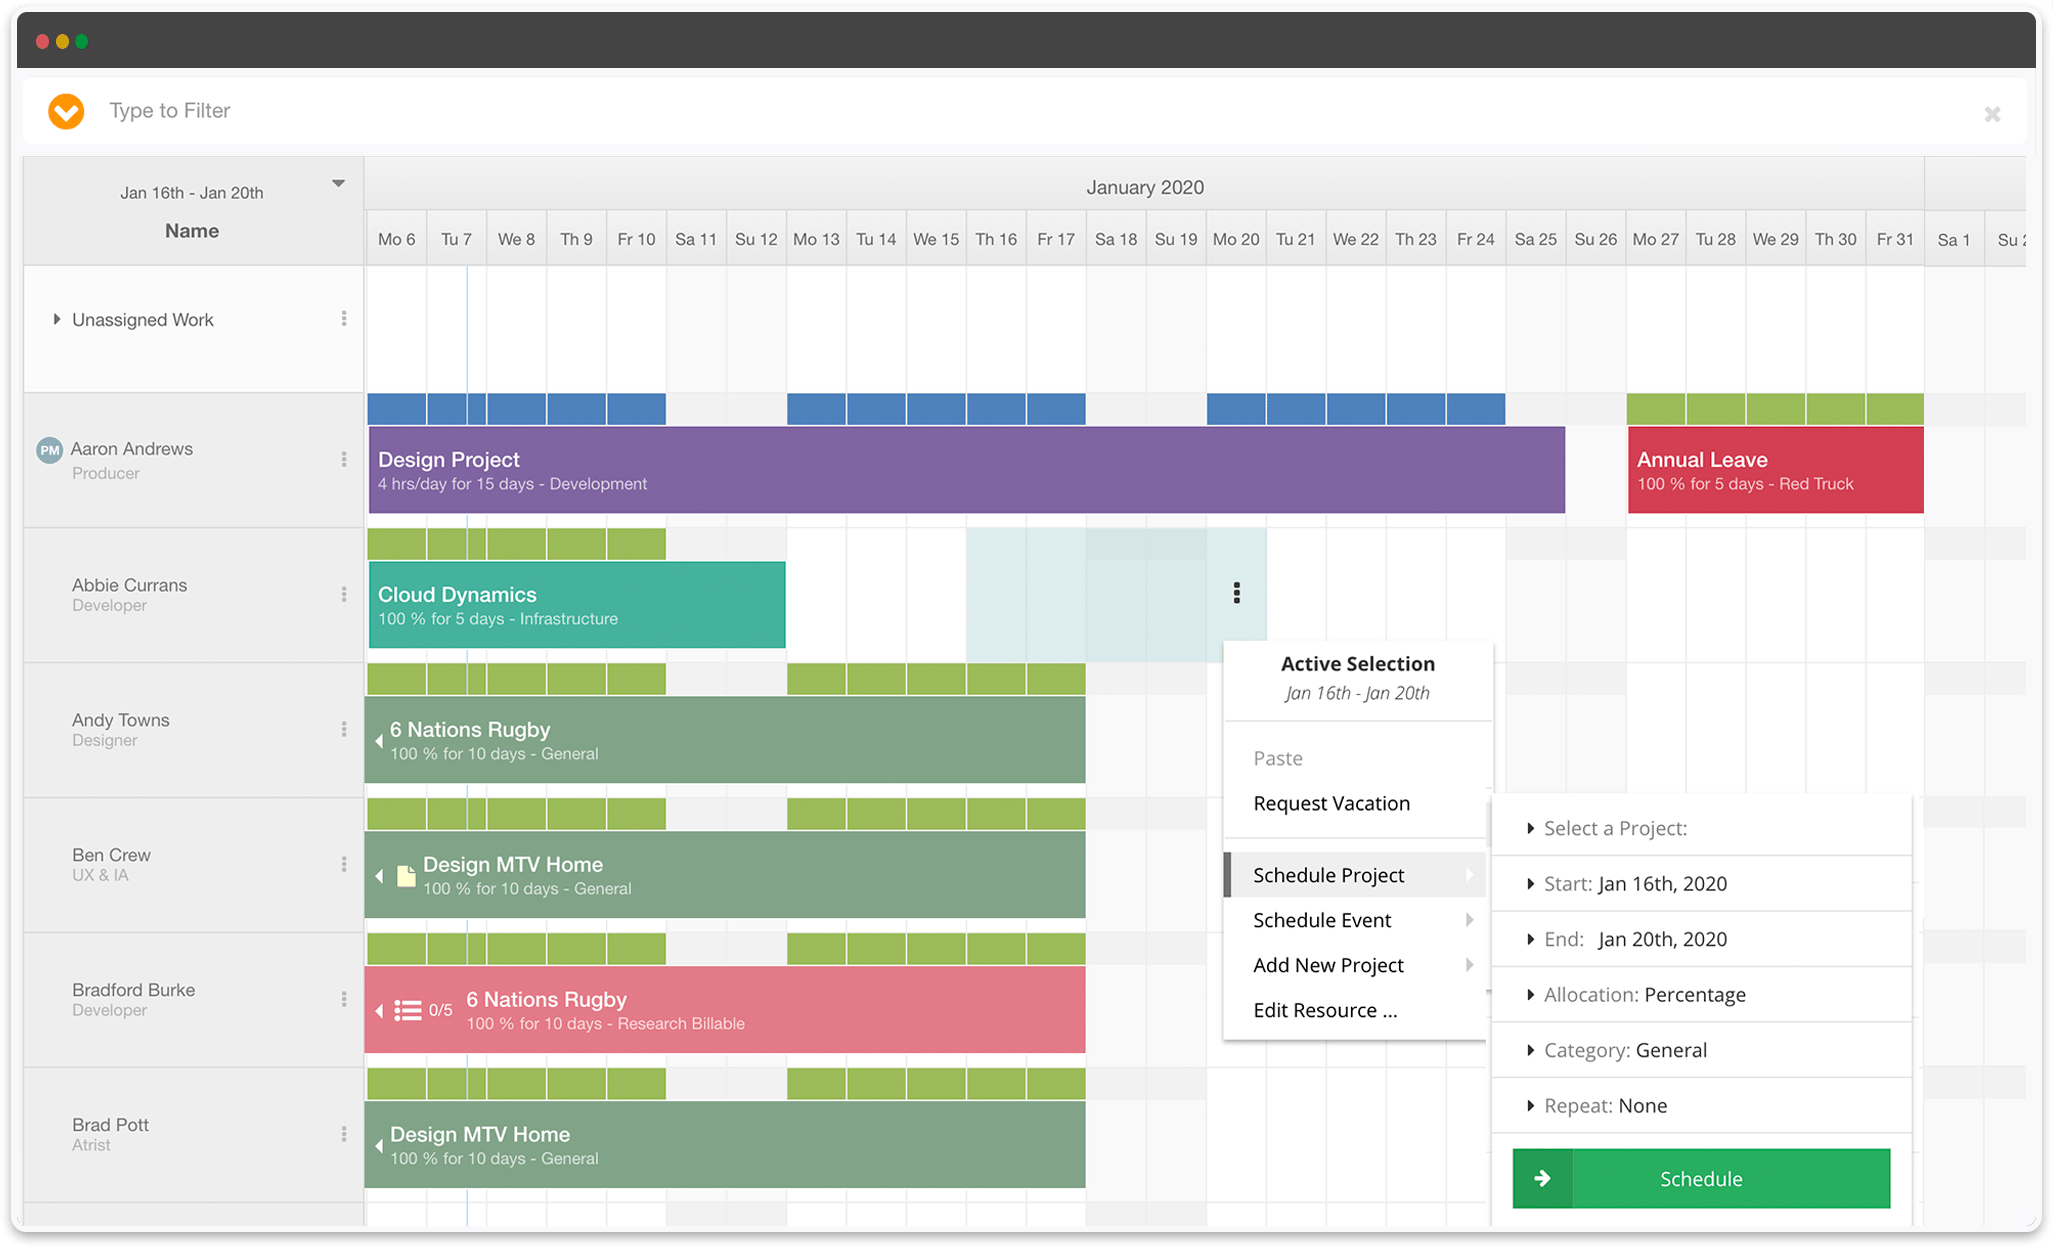 Hub Planner Software - Hub Planner Scheduler for a transparent view when planning and forecasting projects. Easily view available resources based on skill sets, location as well as utilization rate. The drag & drop feature makes for simple scheduling of teams.